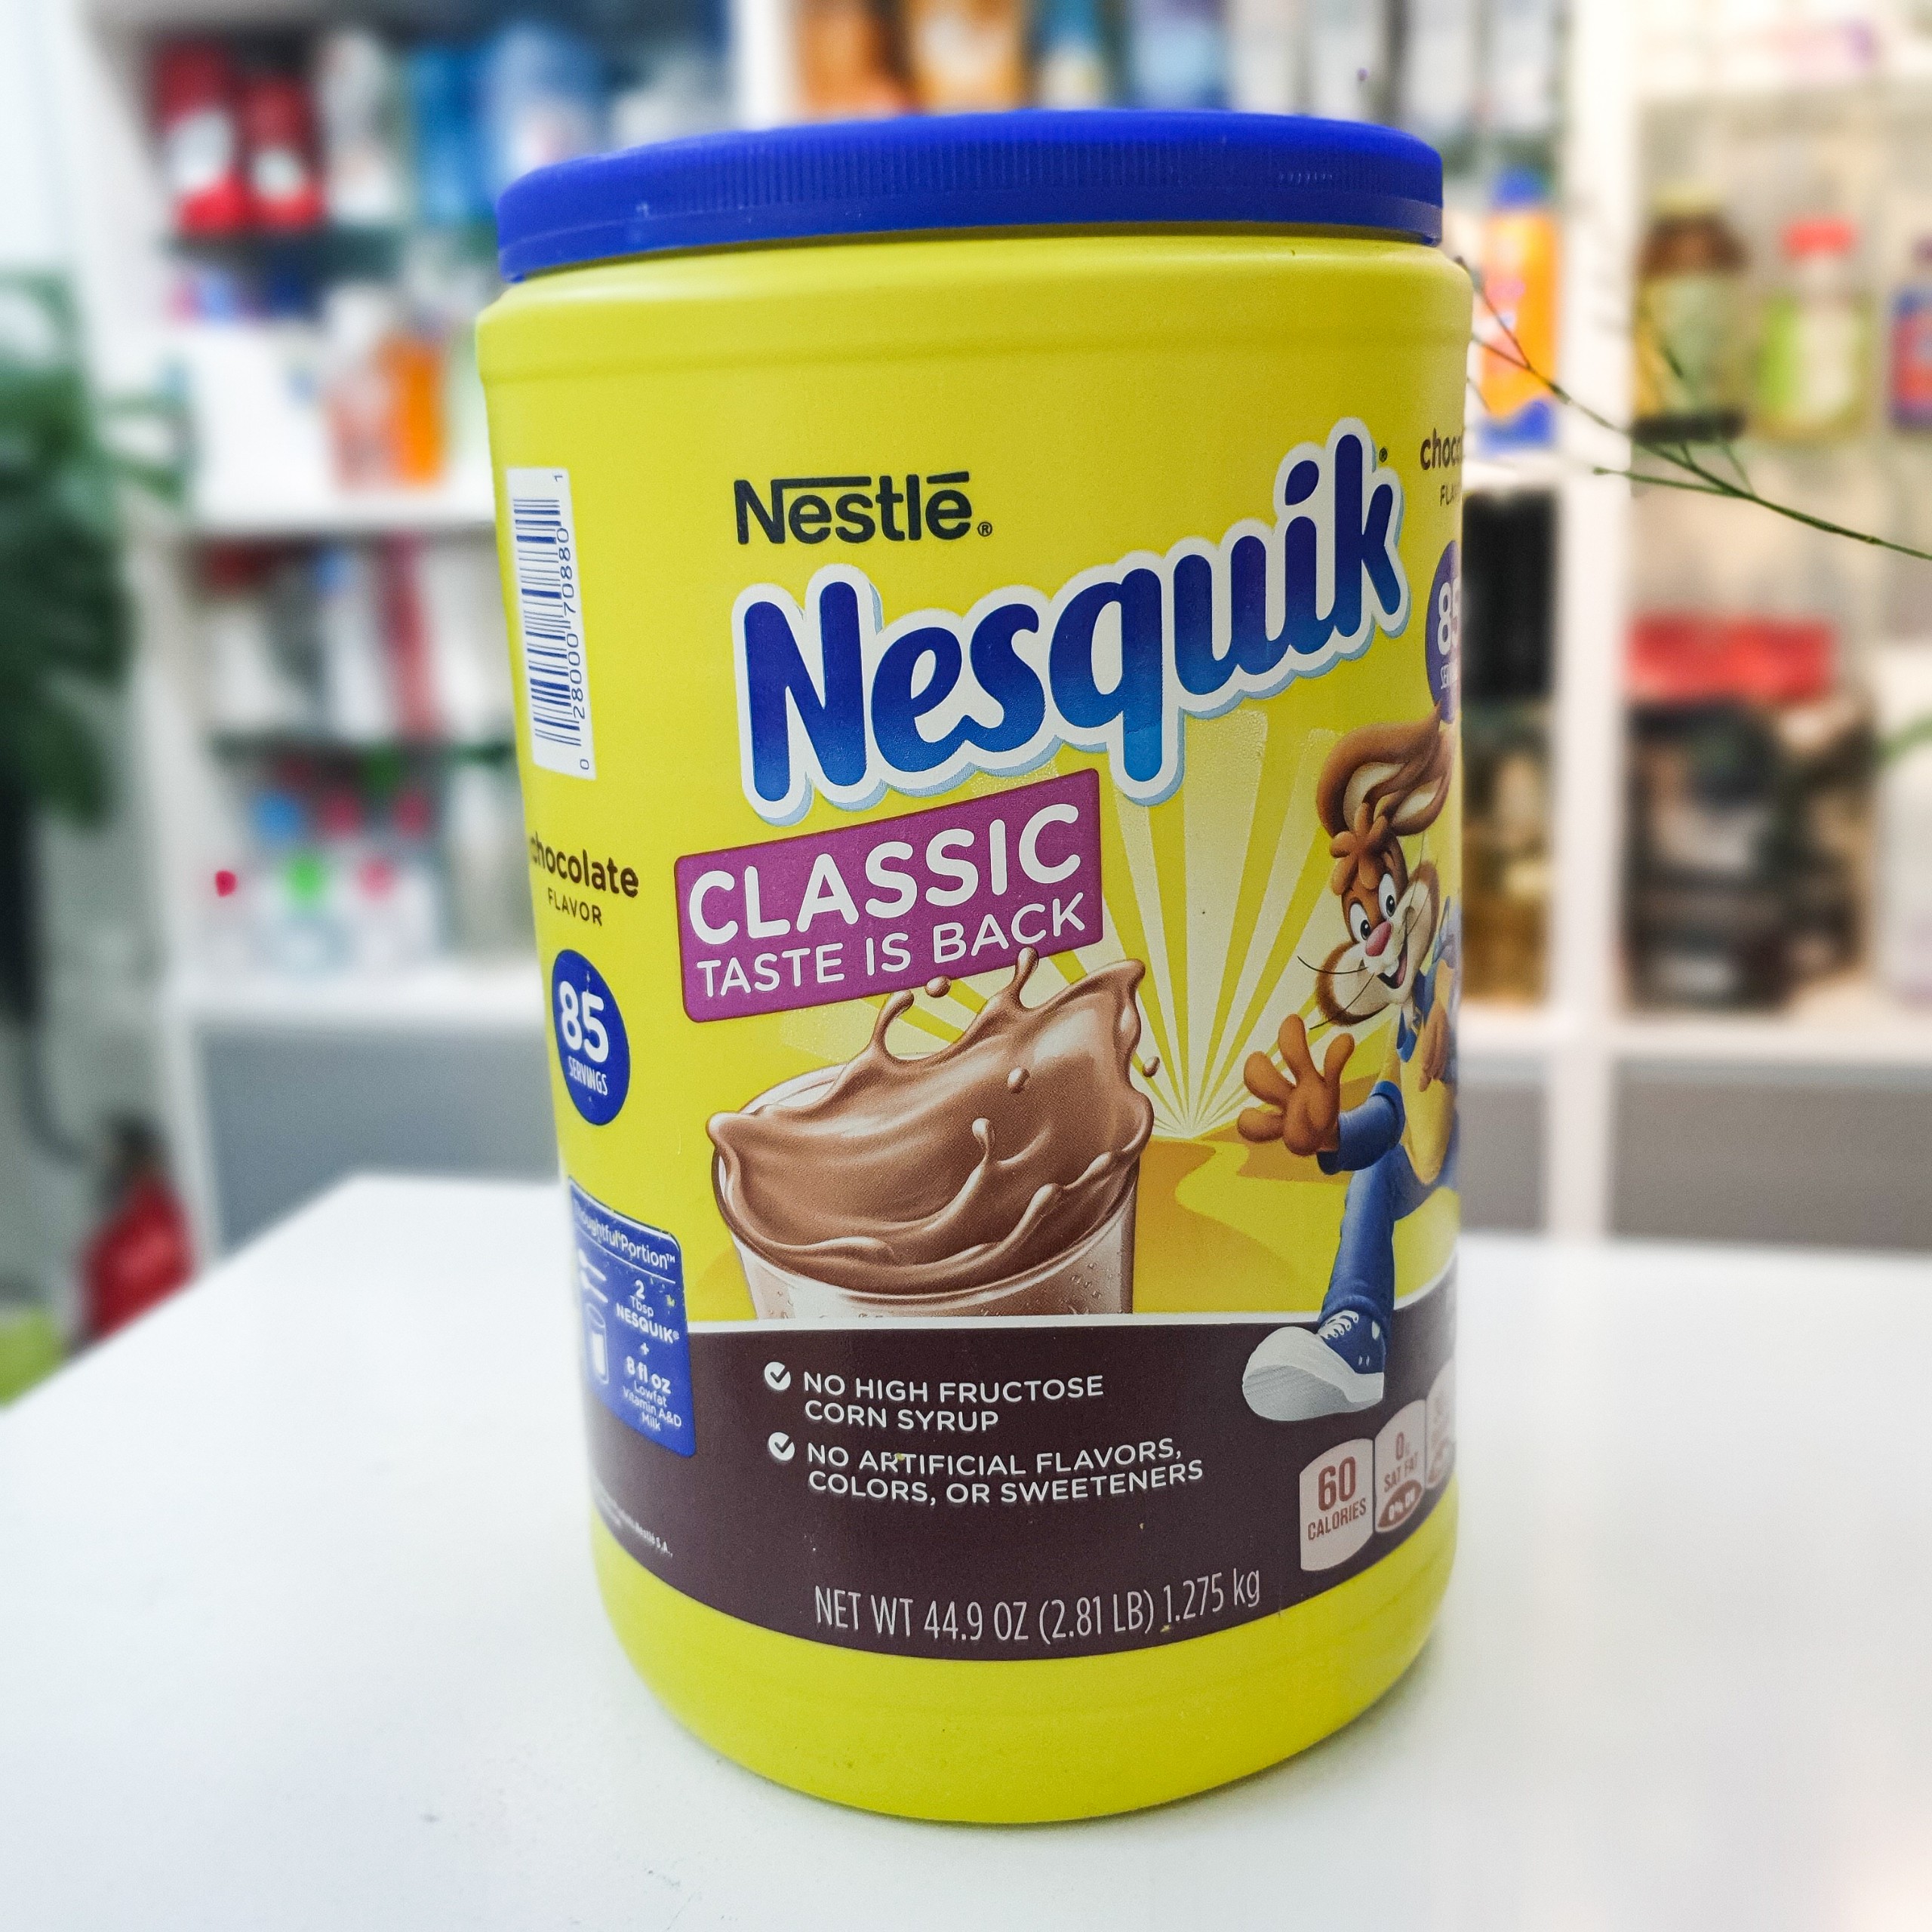 HCMBột cacao pha sữa Nestle Nesquik Chocolate của Mỹ 1.275kg